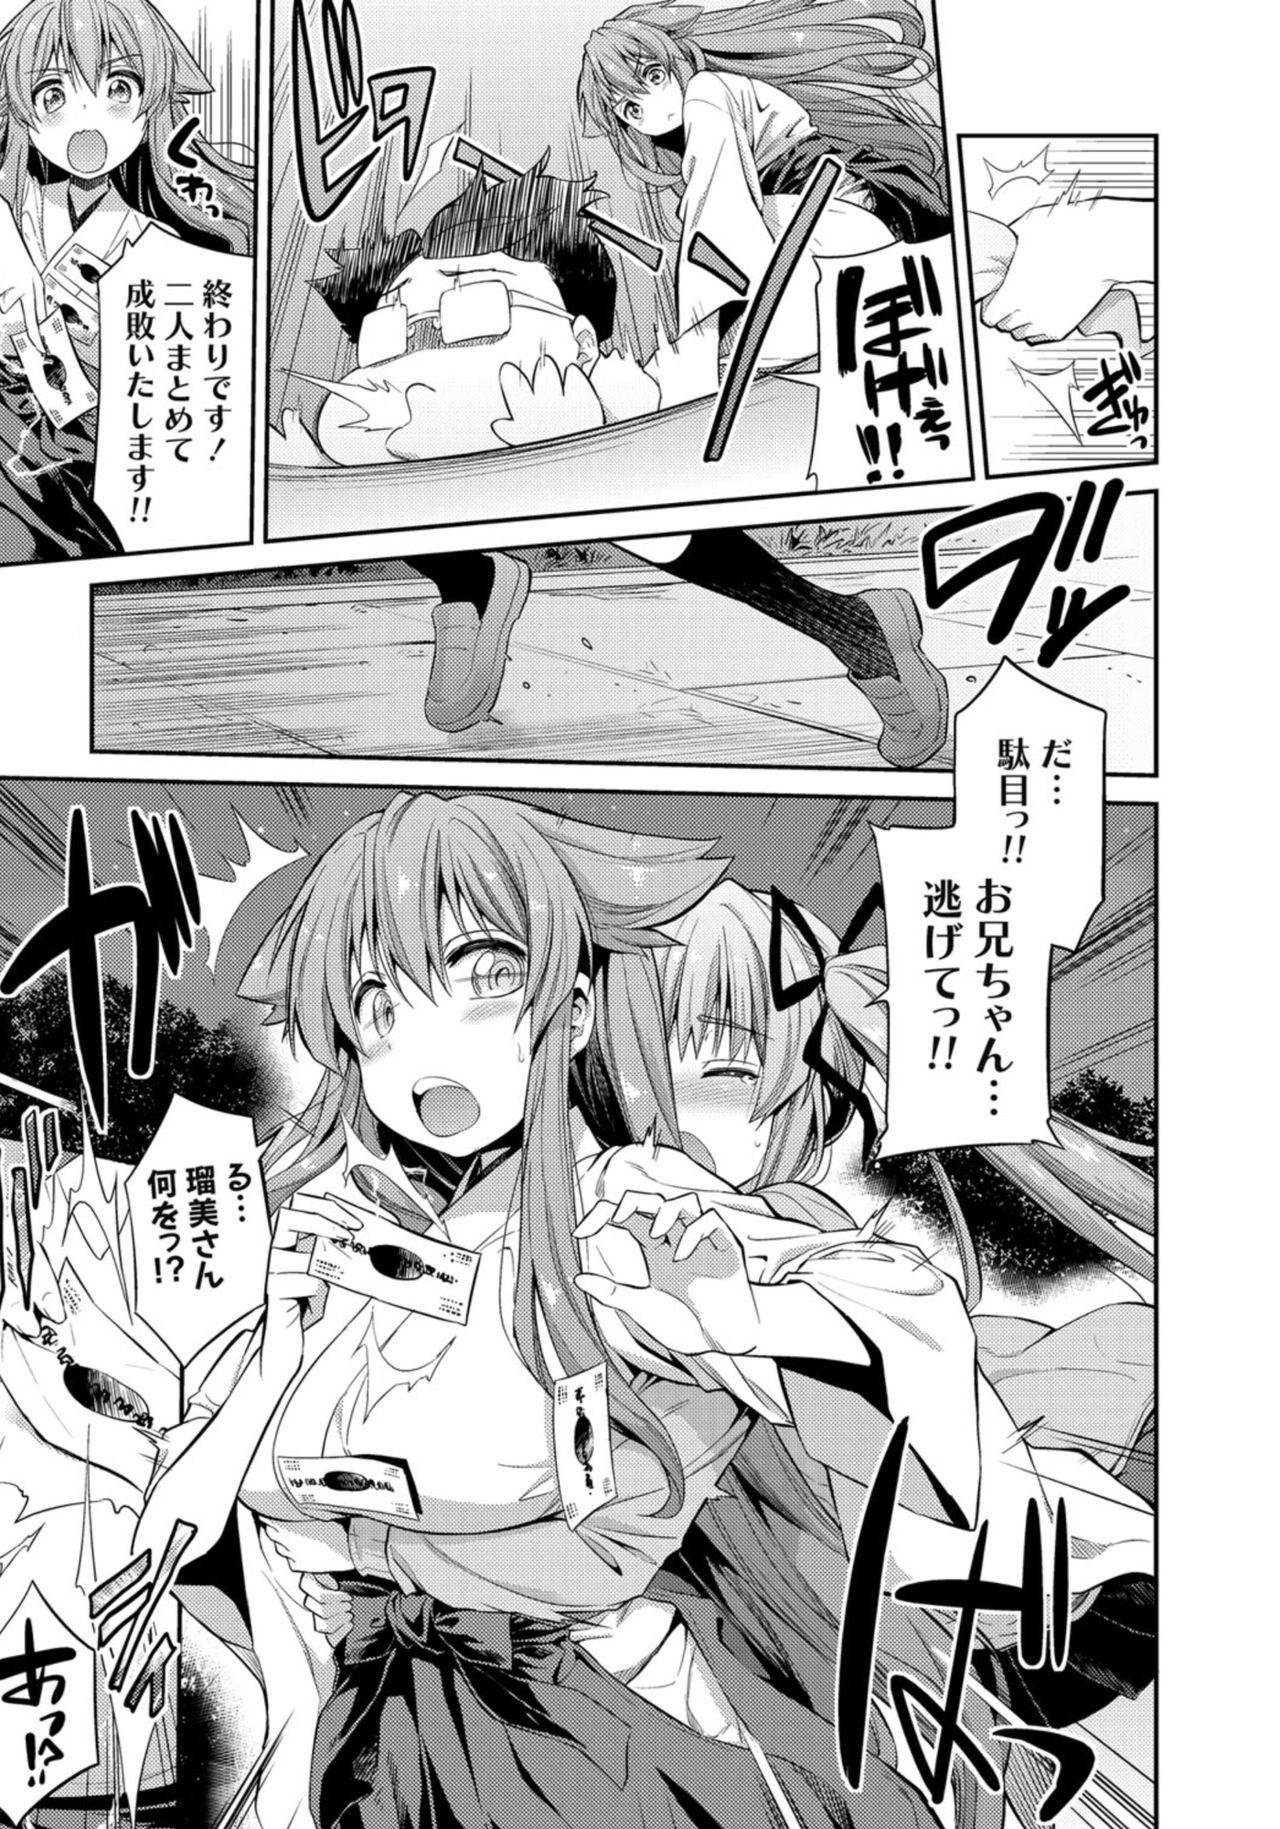 Instagram 憑りつき×乗っ取り×孕ませろ！肆憑き 〜ドロリ濃厚！退魔巫女種付けレイプ！〜 Leaked - Page 3